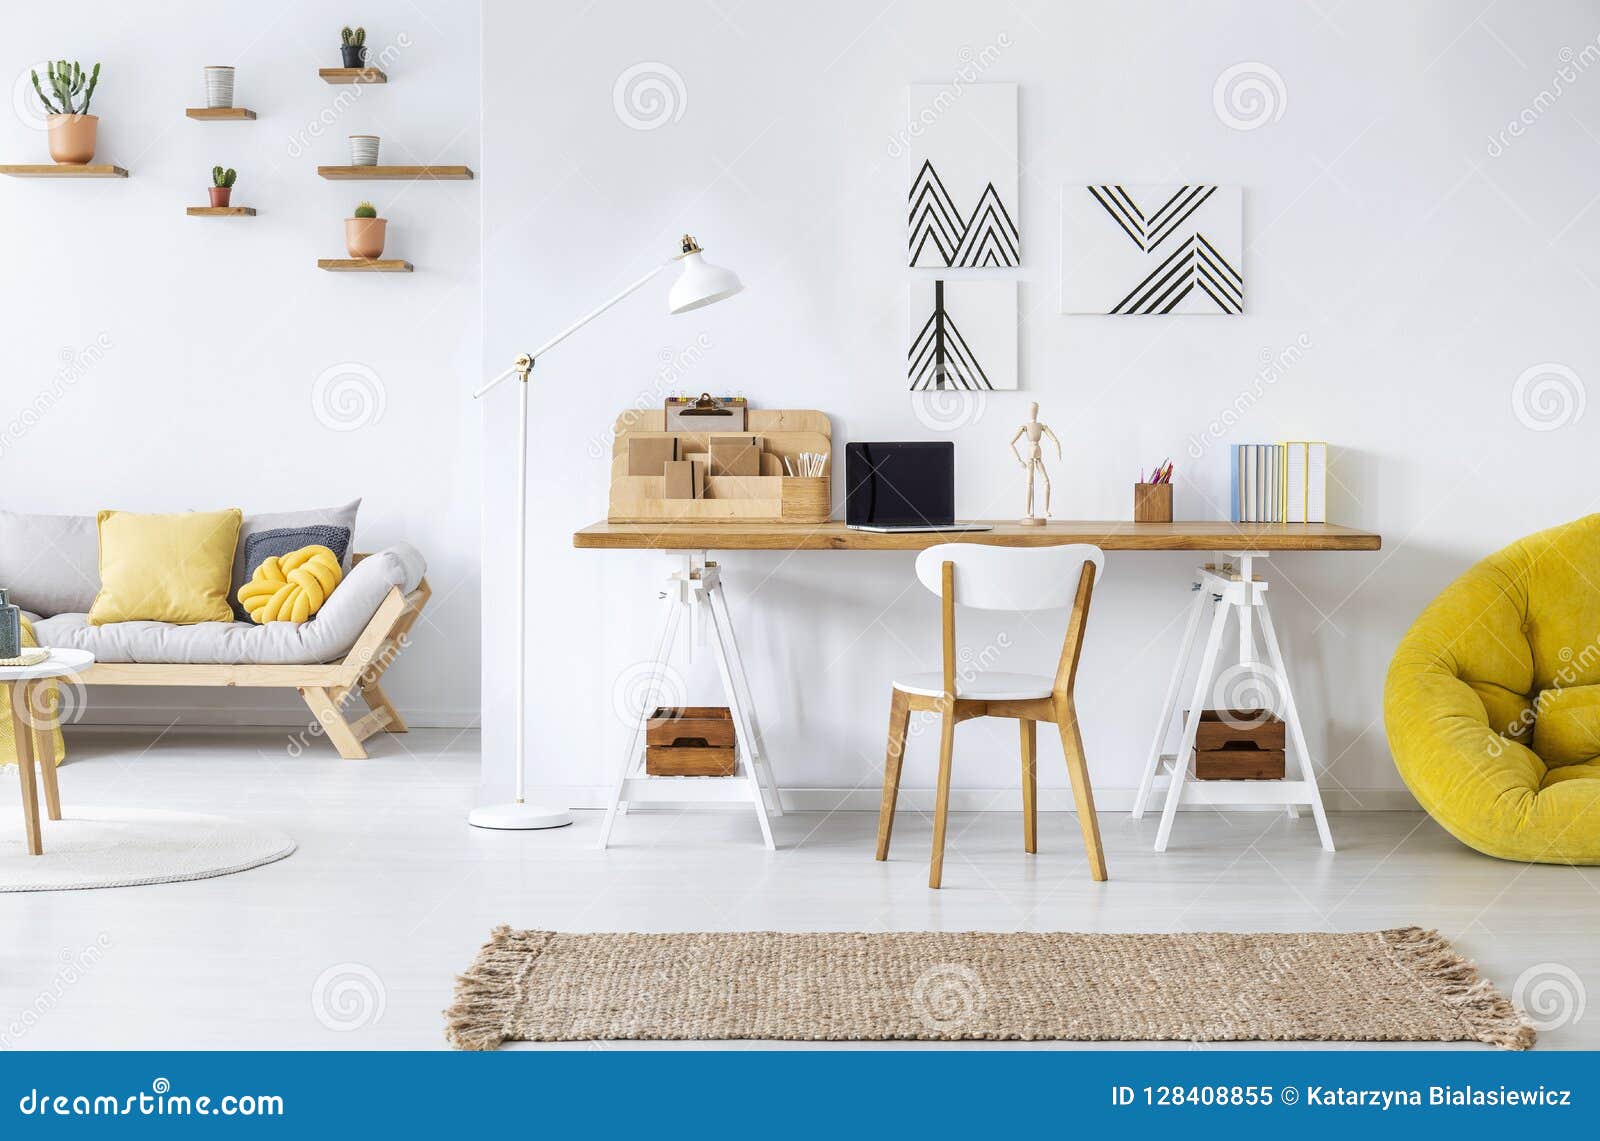 modern home office interior with graphics, desk, sofa and yellow pouf